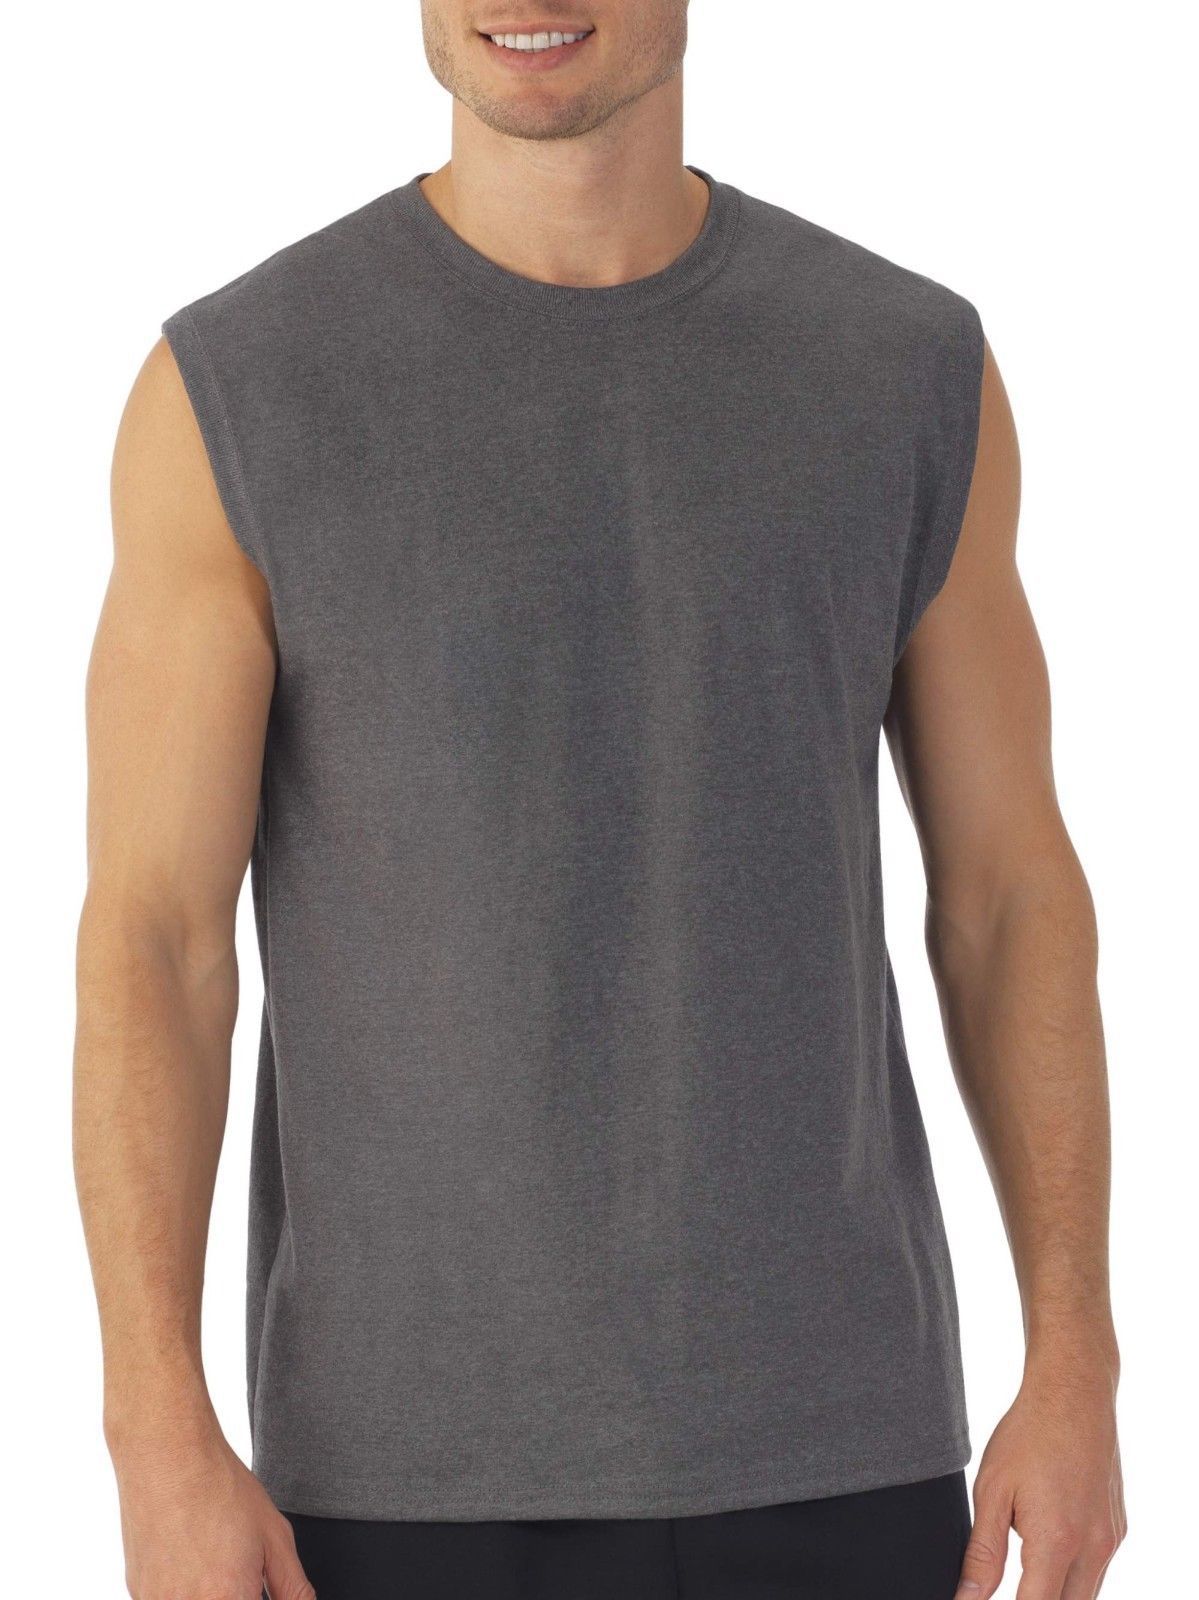 Fruit Of The Loom Men's Platinum Muscle Shirt Size Large (42-44 ...